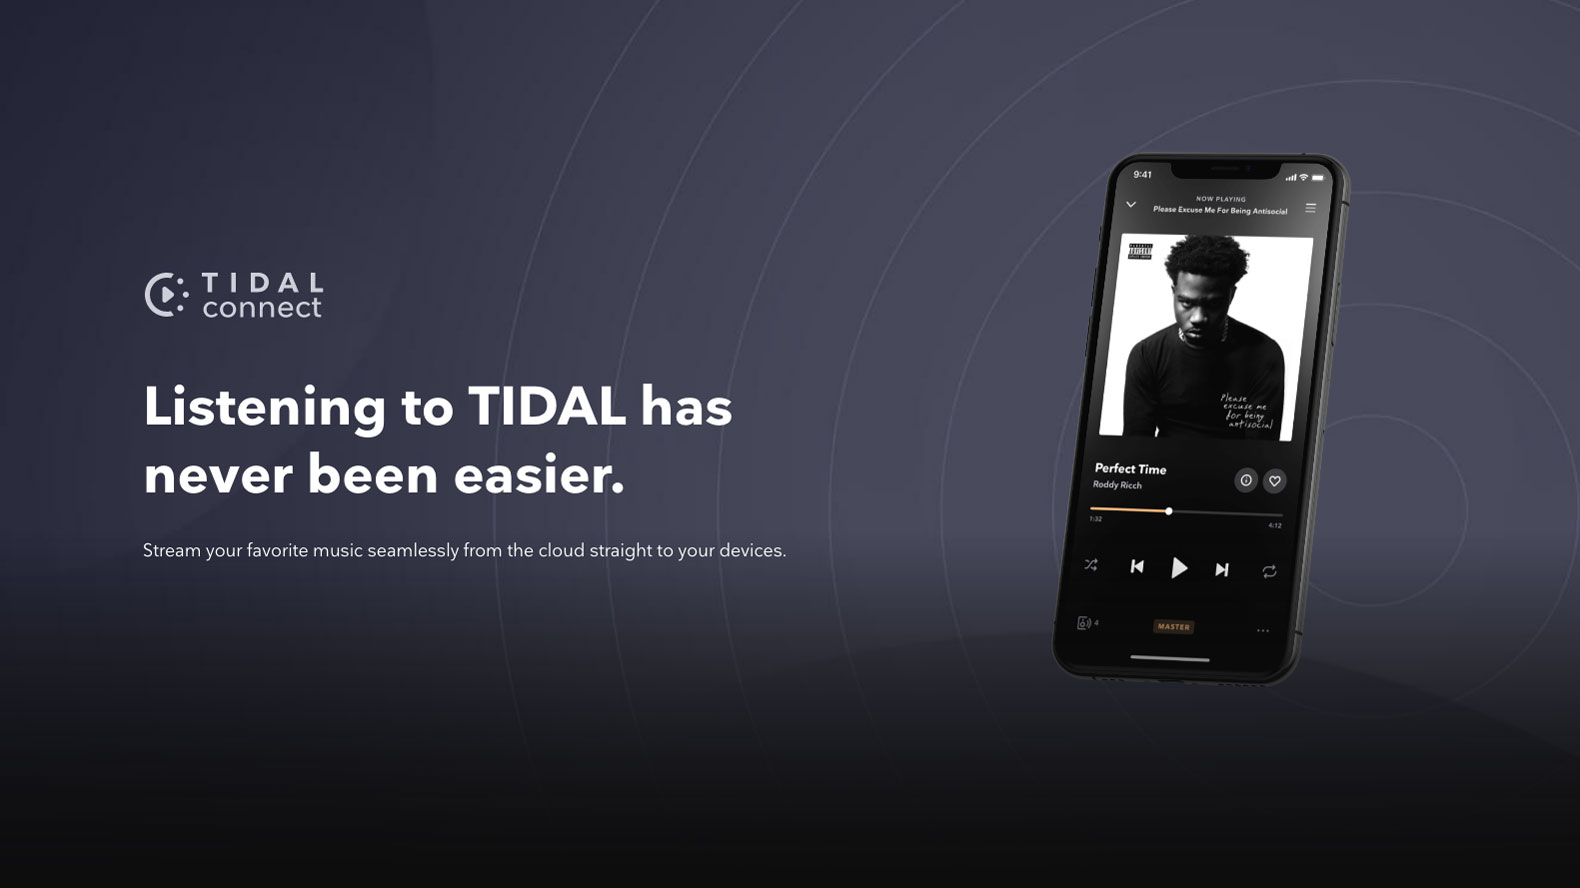 (Screenshot from https://tidal.com/connect)